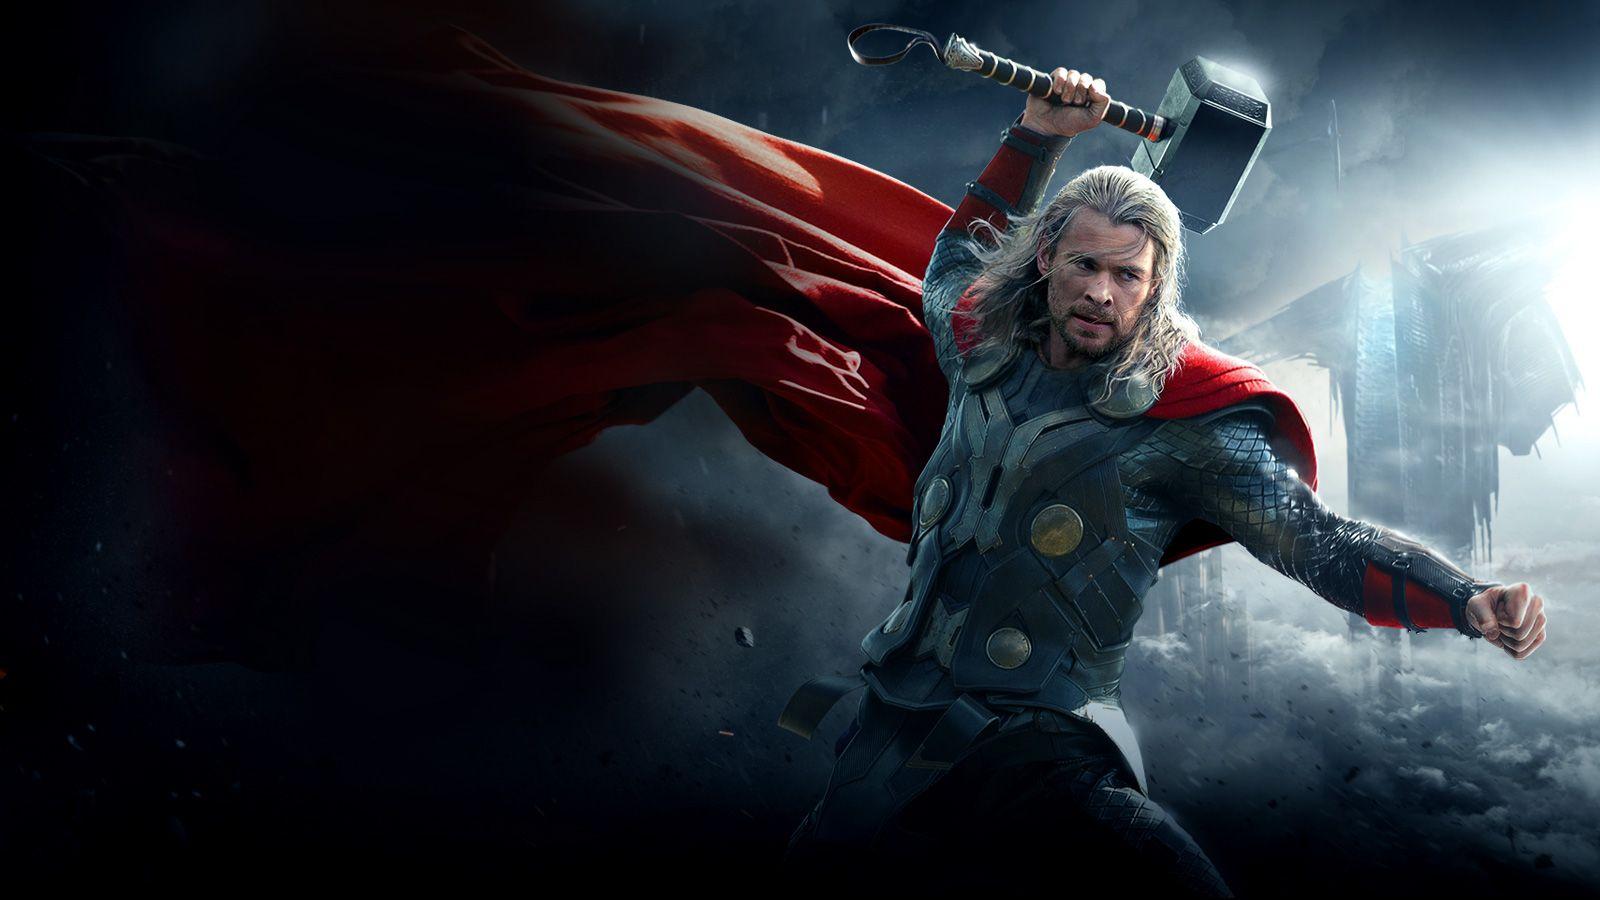 1600x900px Wallpaper of Thor Image HD 11